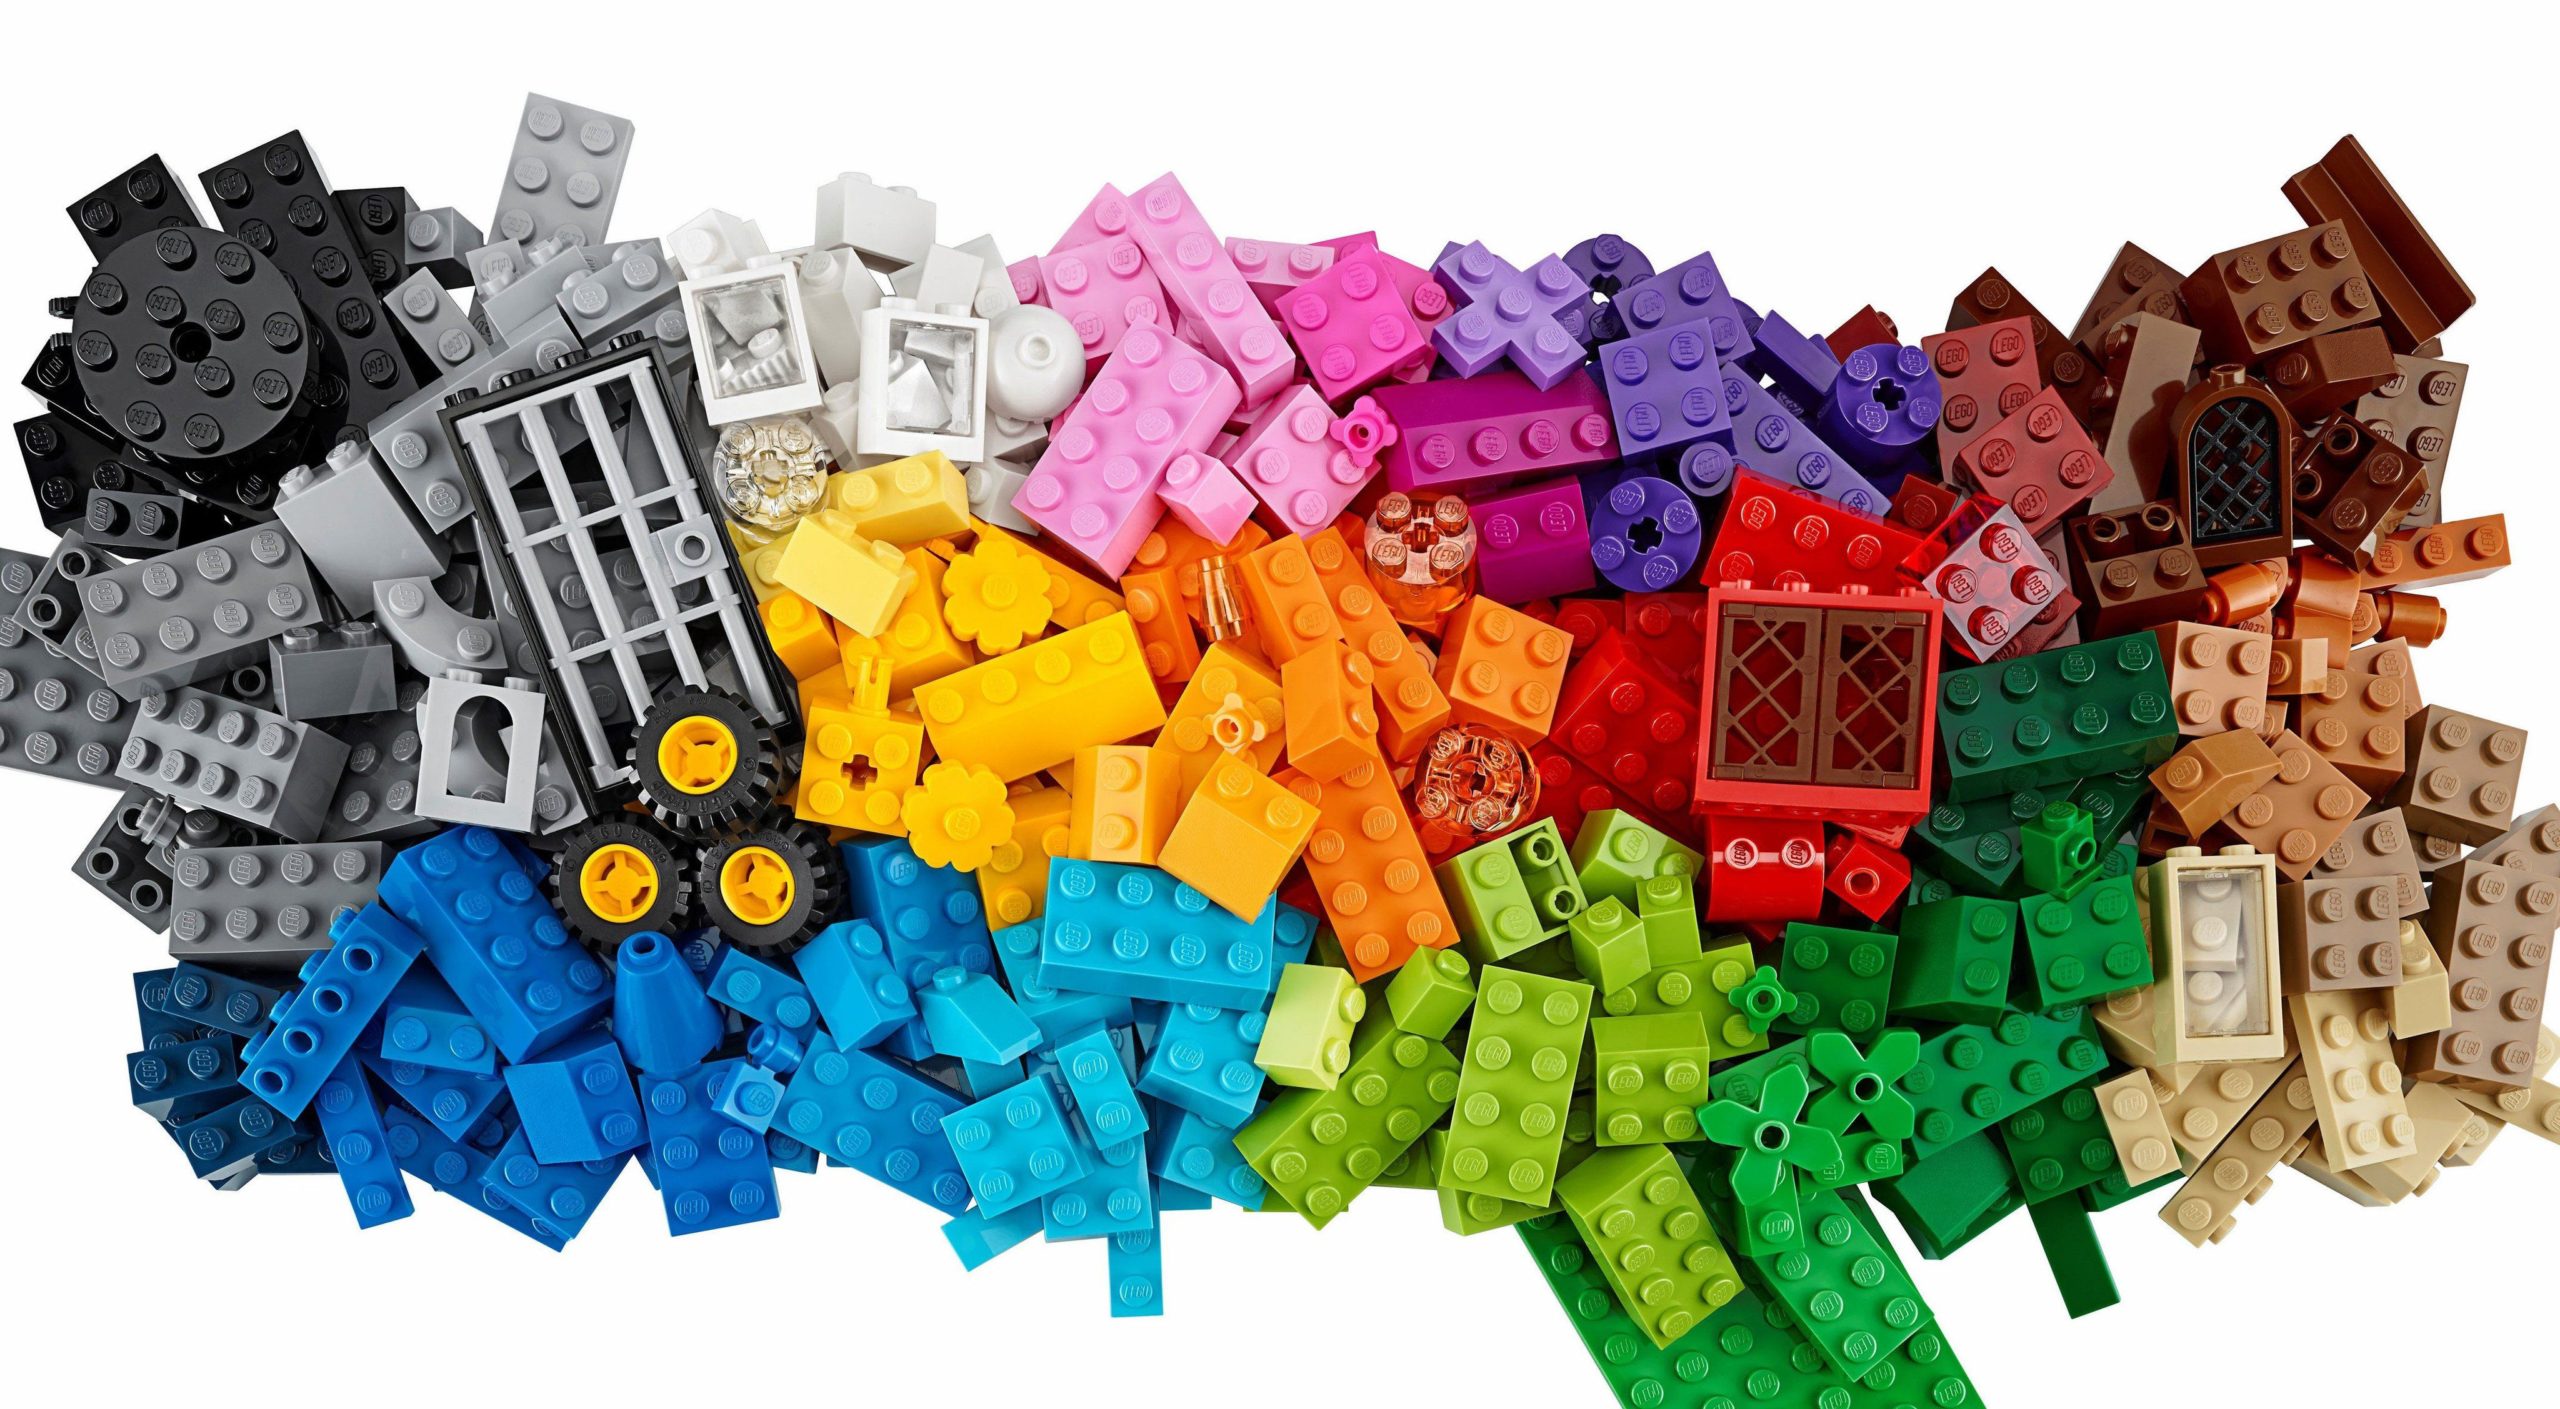 Cheap LEGO counterparts: the best brands and sets for 2022